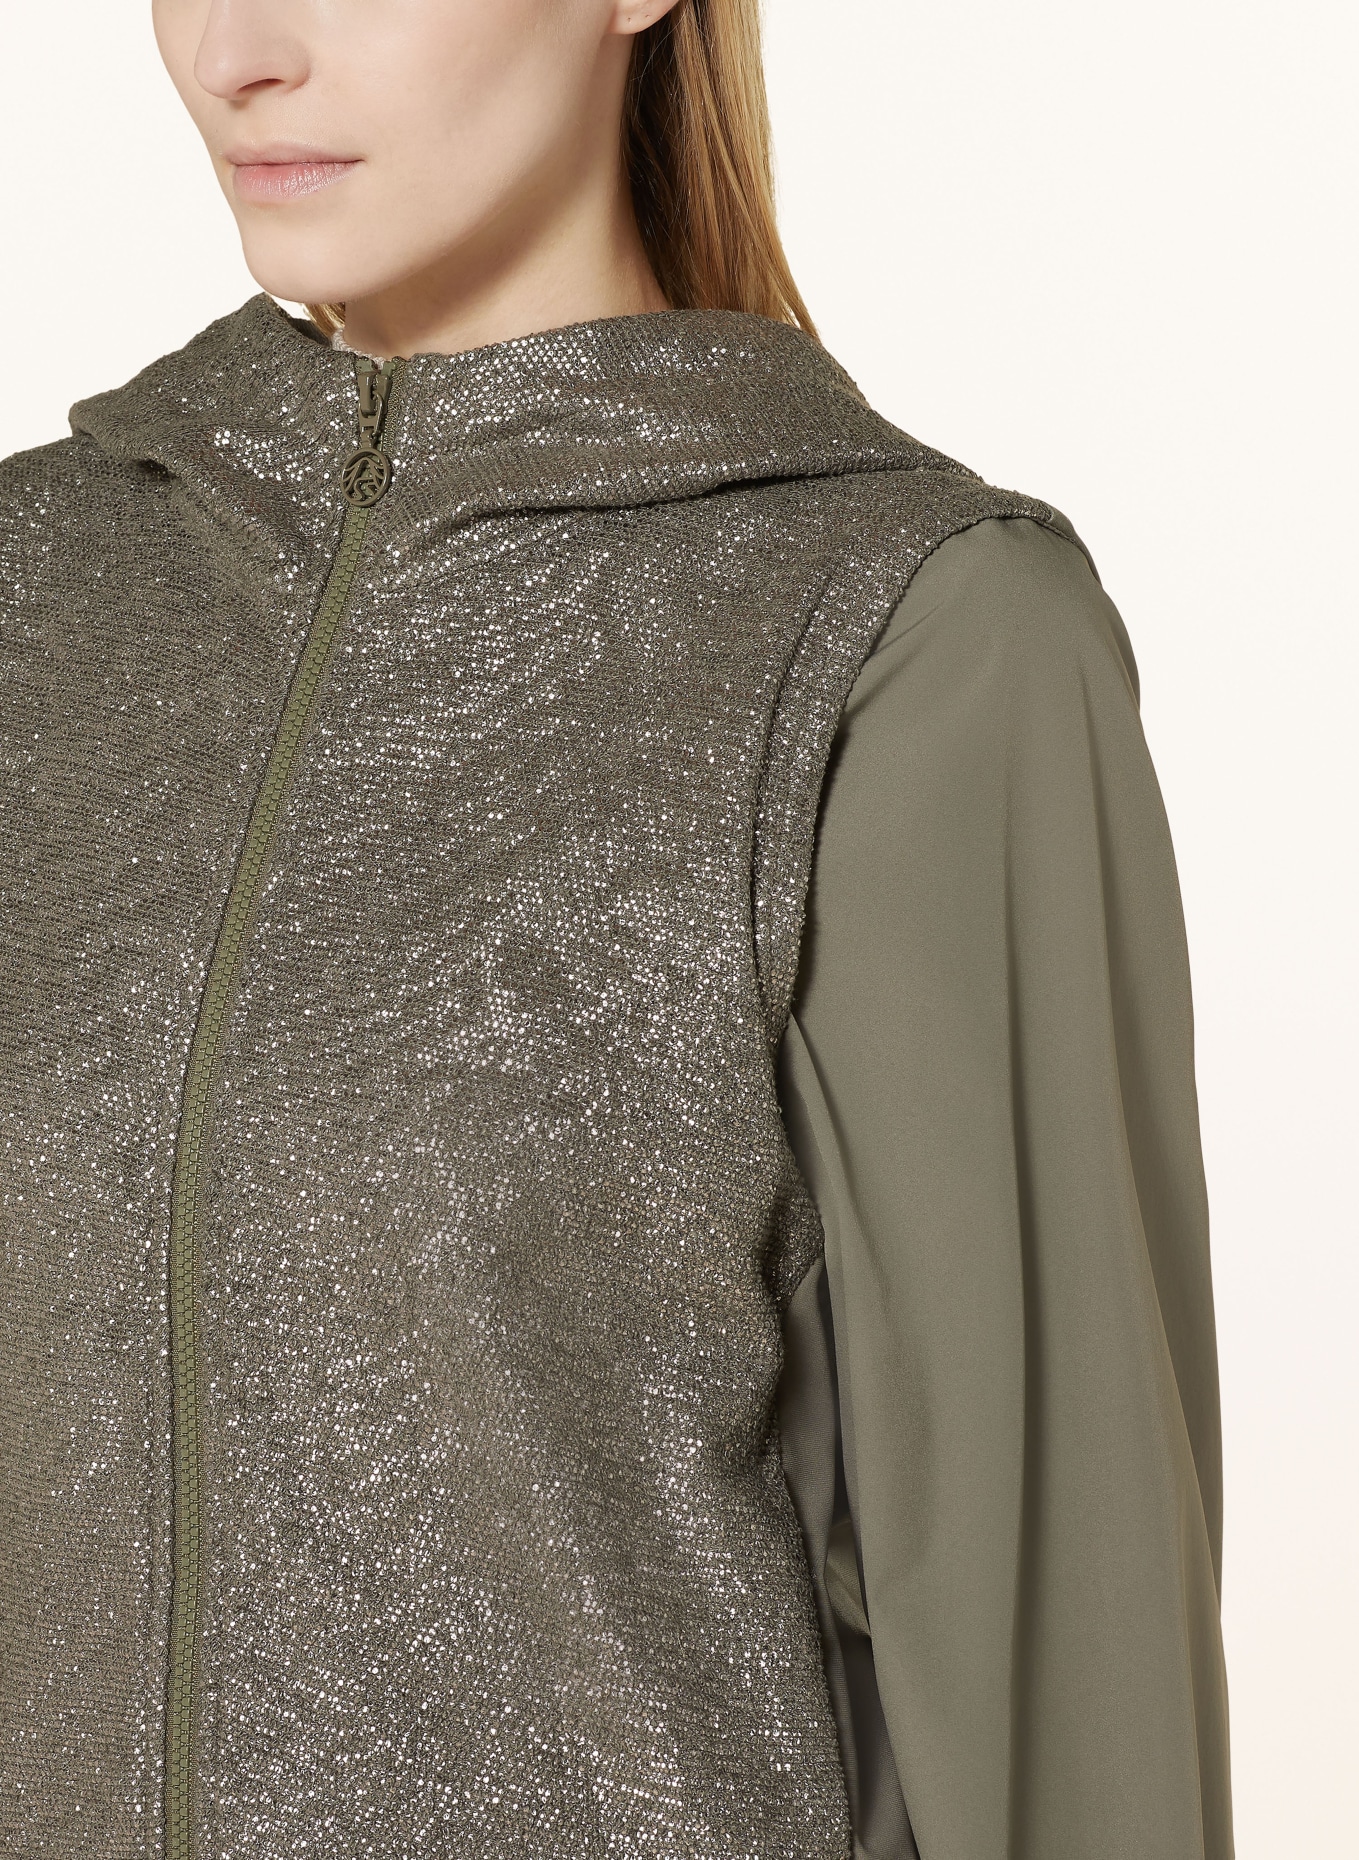 ULLI EHRLICH SPORTALM 2-in-1 Bomber jacket in mixed materials, Color: KHAKI/ SILVER (Image 5)